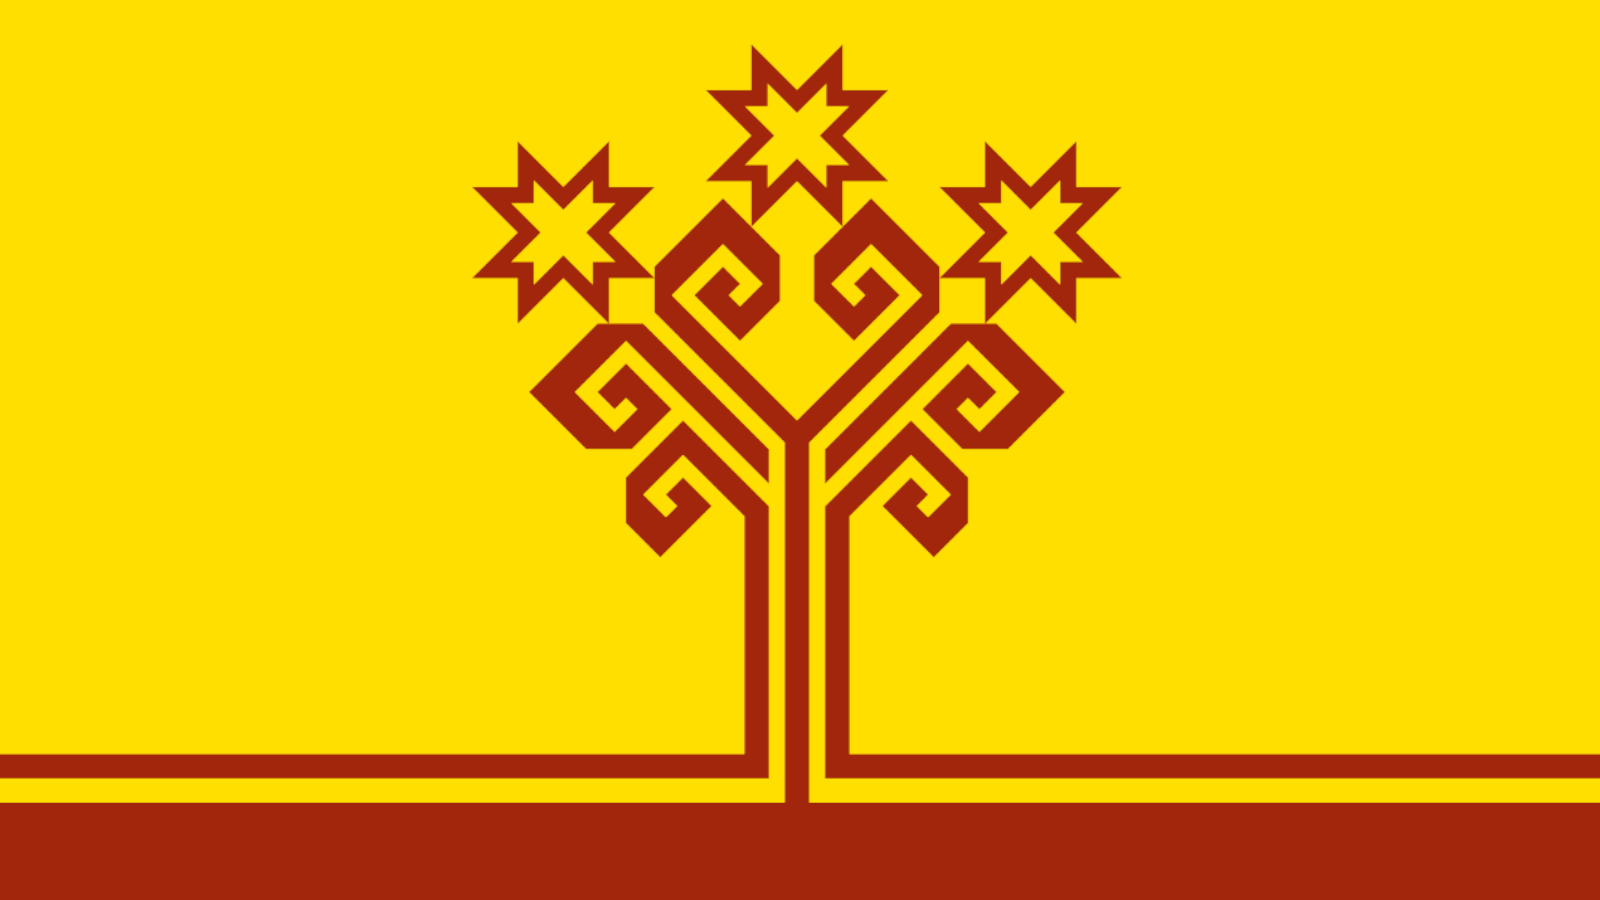 Khaval, the Chuvash initiative group, announces another enrollment for a free autumn online course of the Chuvash language